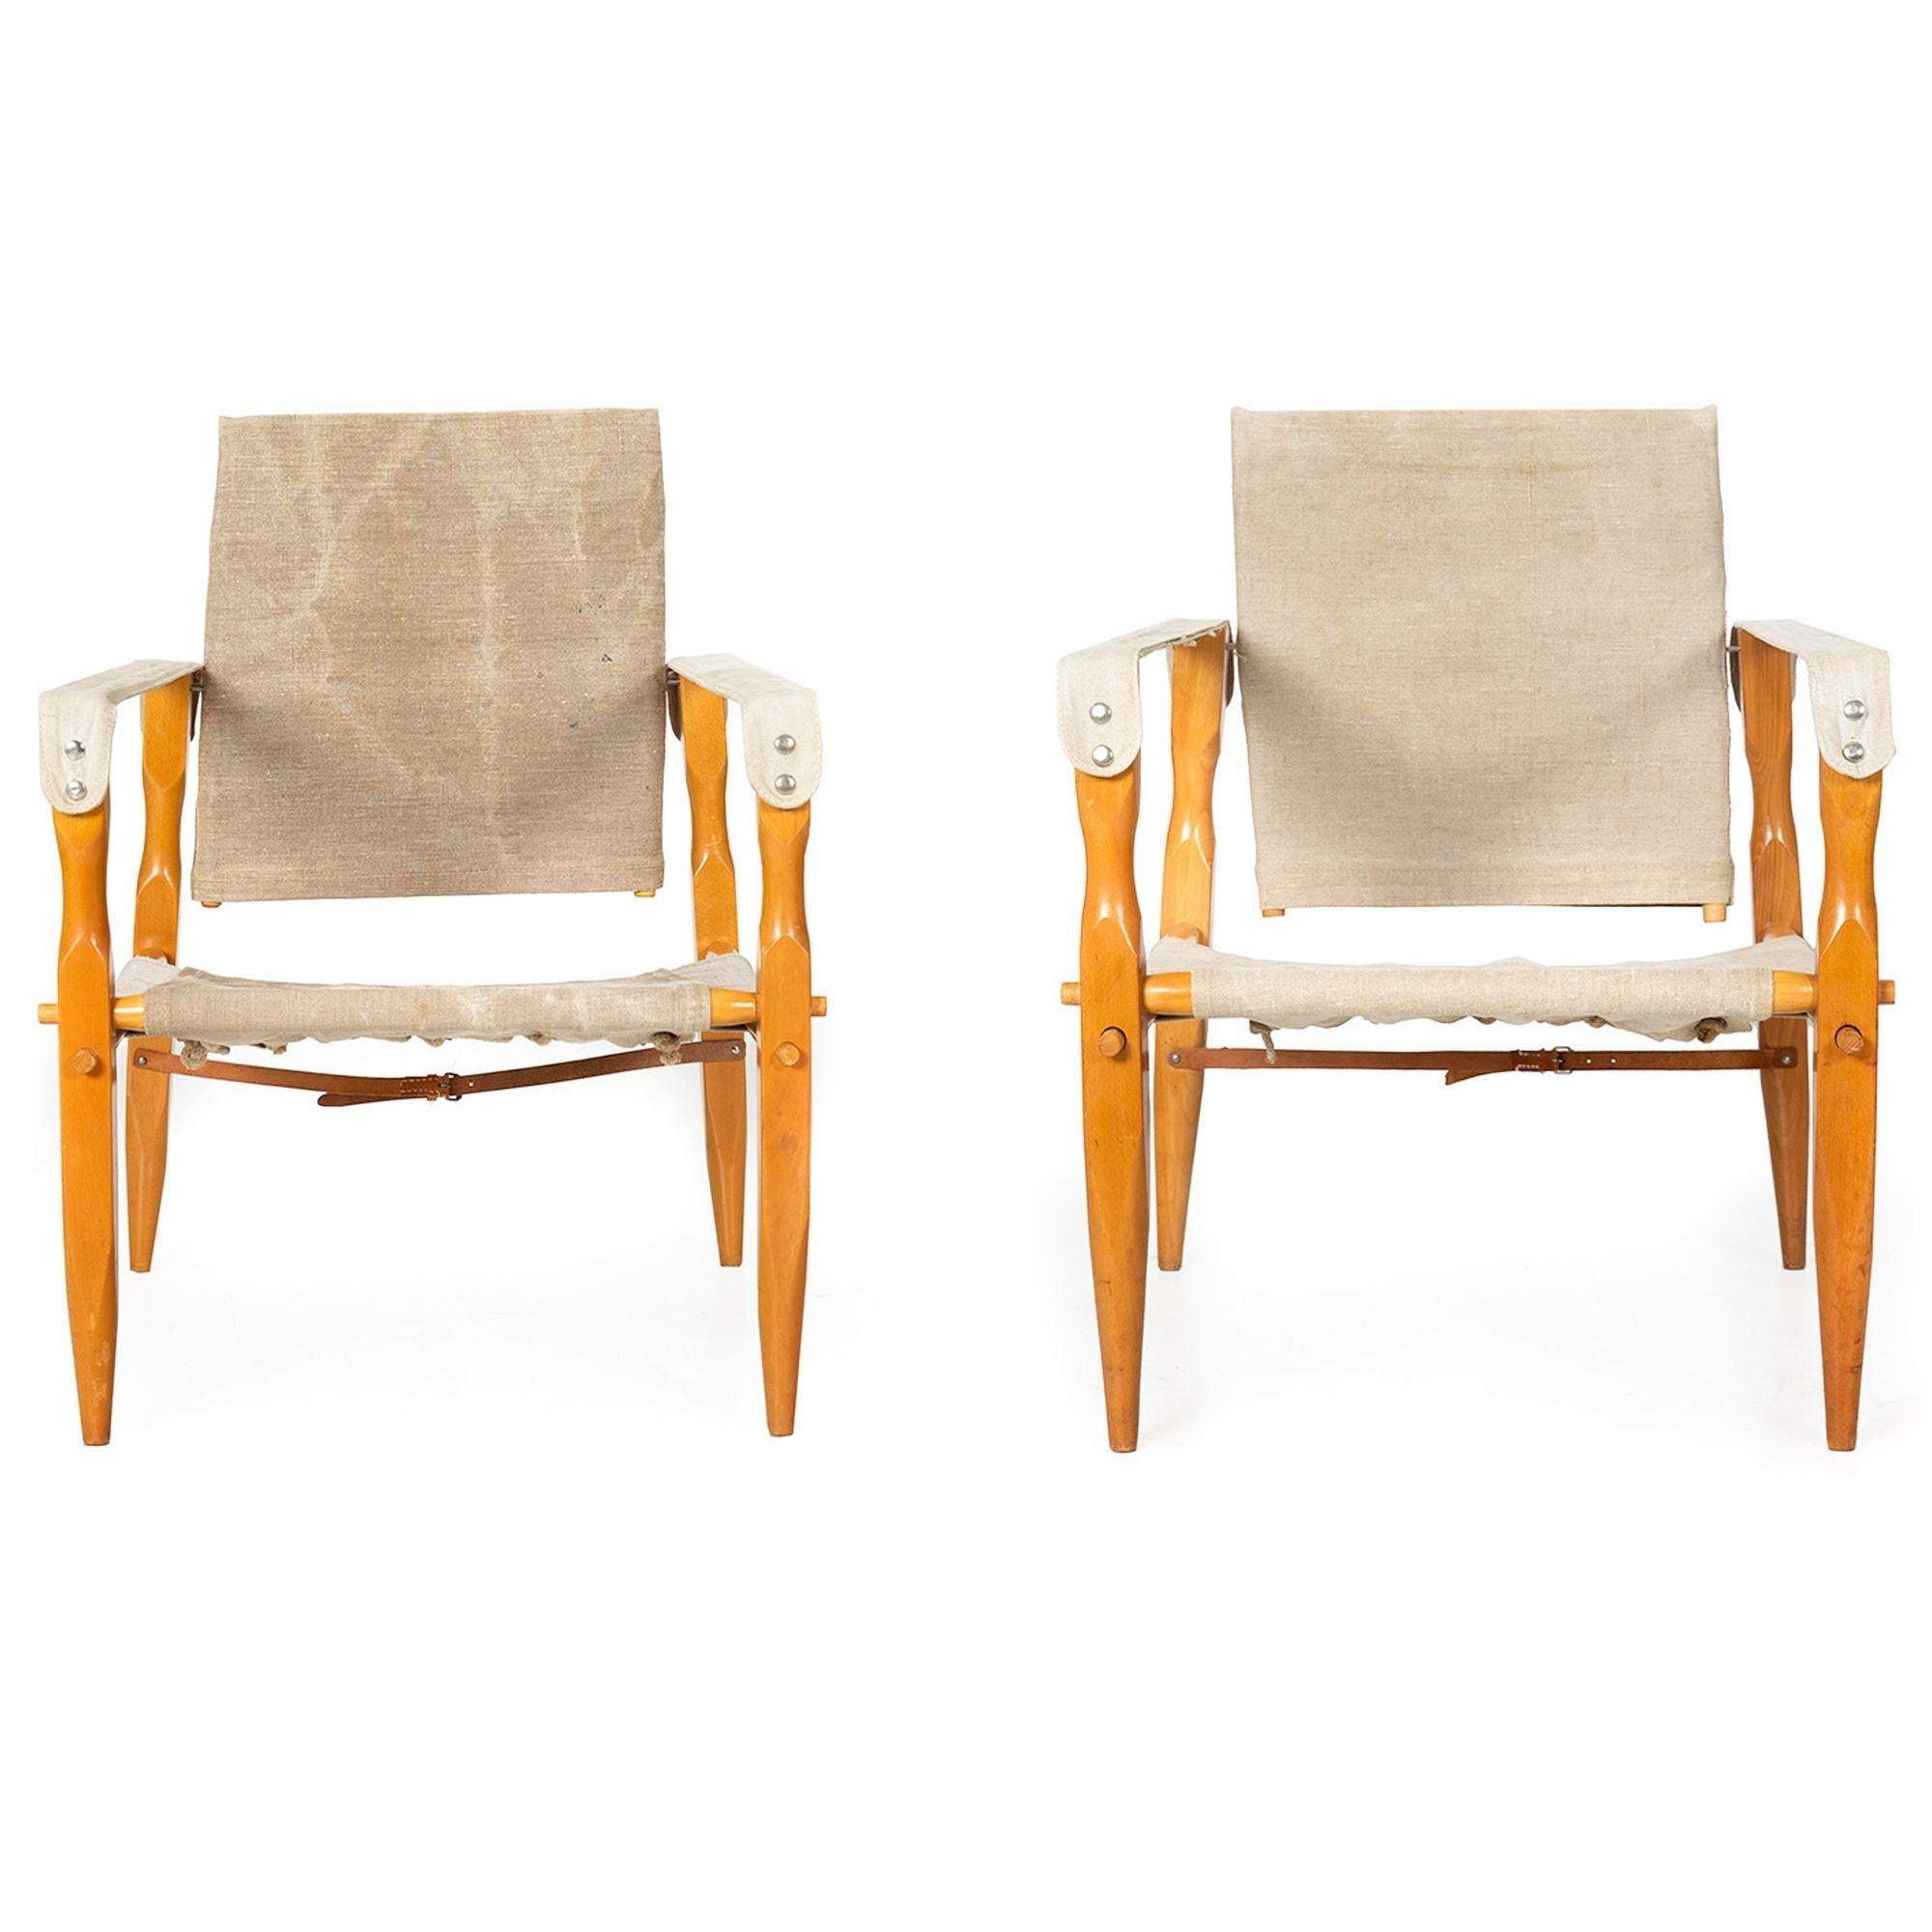 PAIR OF SCADINAVIAN SAFARI CHAIRS
With original cotton canvas upholstery, unmarked, circa 1970s
Item # 301XUJ28D 

A finely made pair of Scandinavian safari chairs from the third quarter of the 20th century, they retain their original cotton canvas